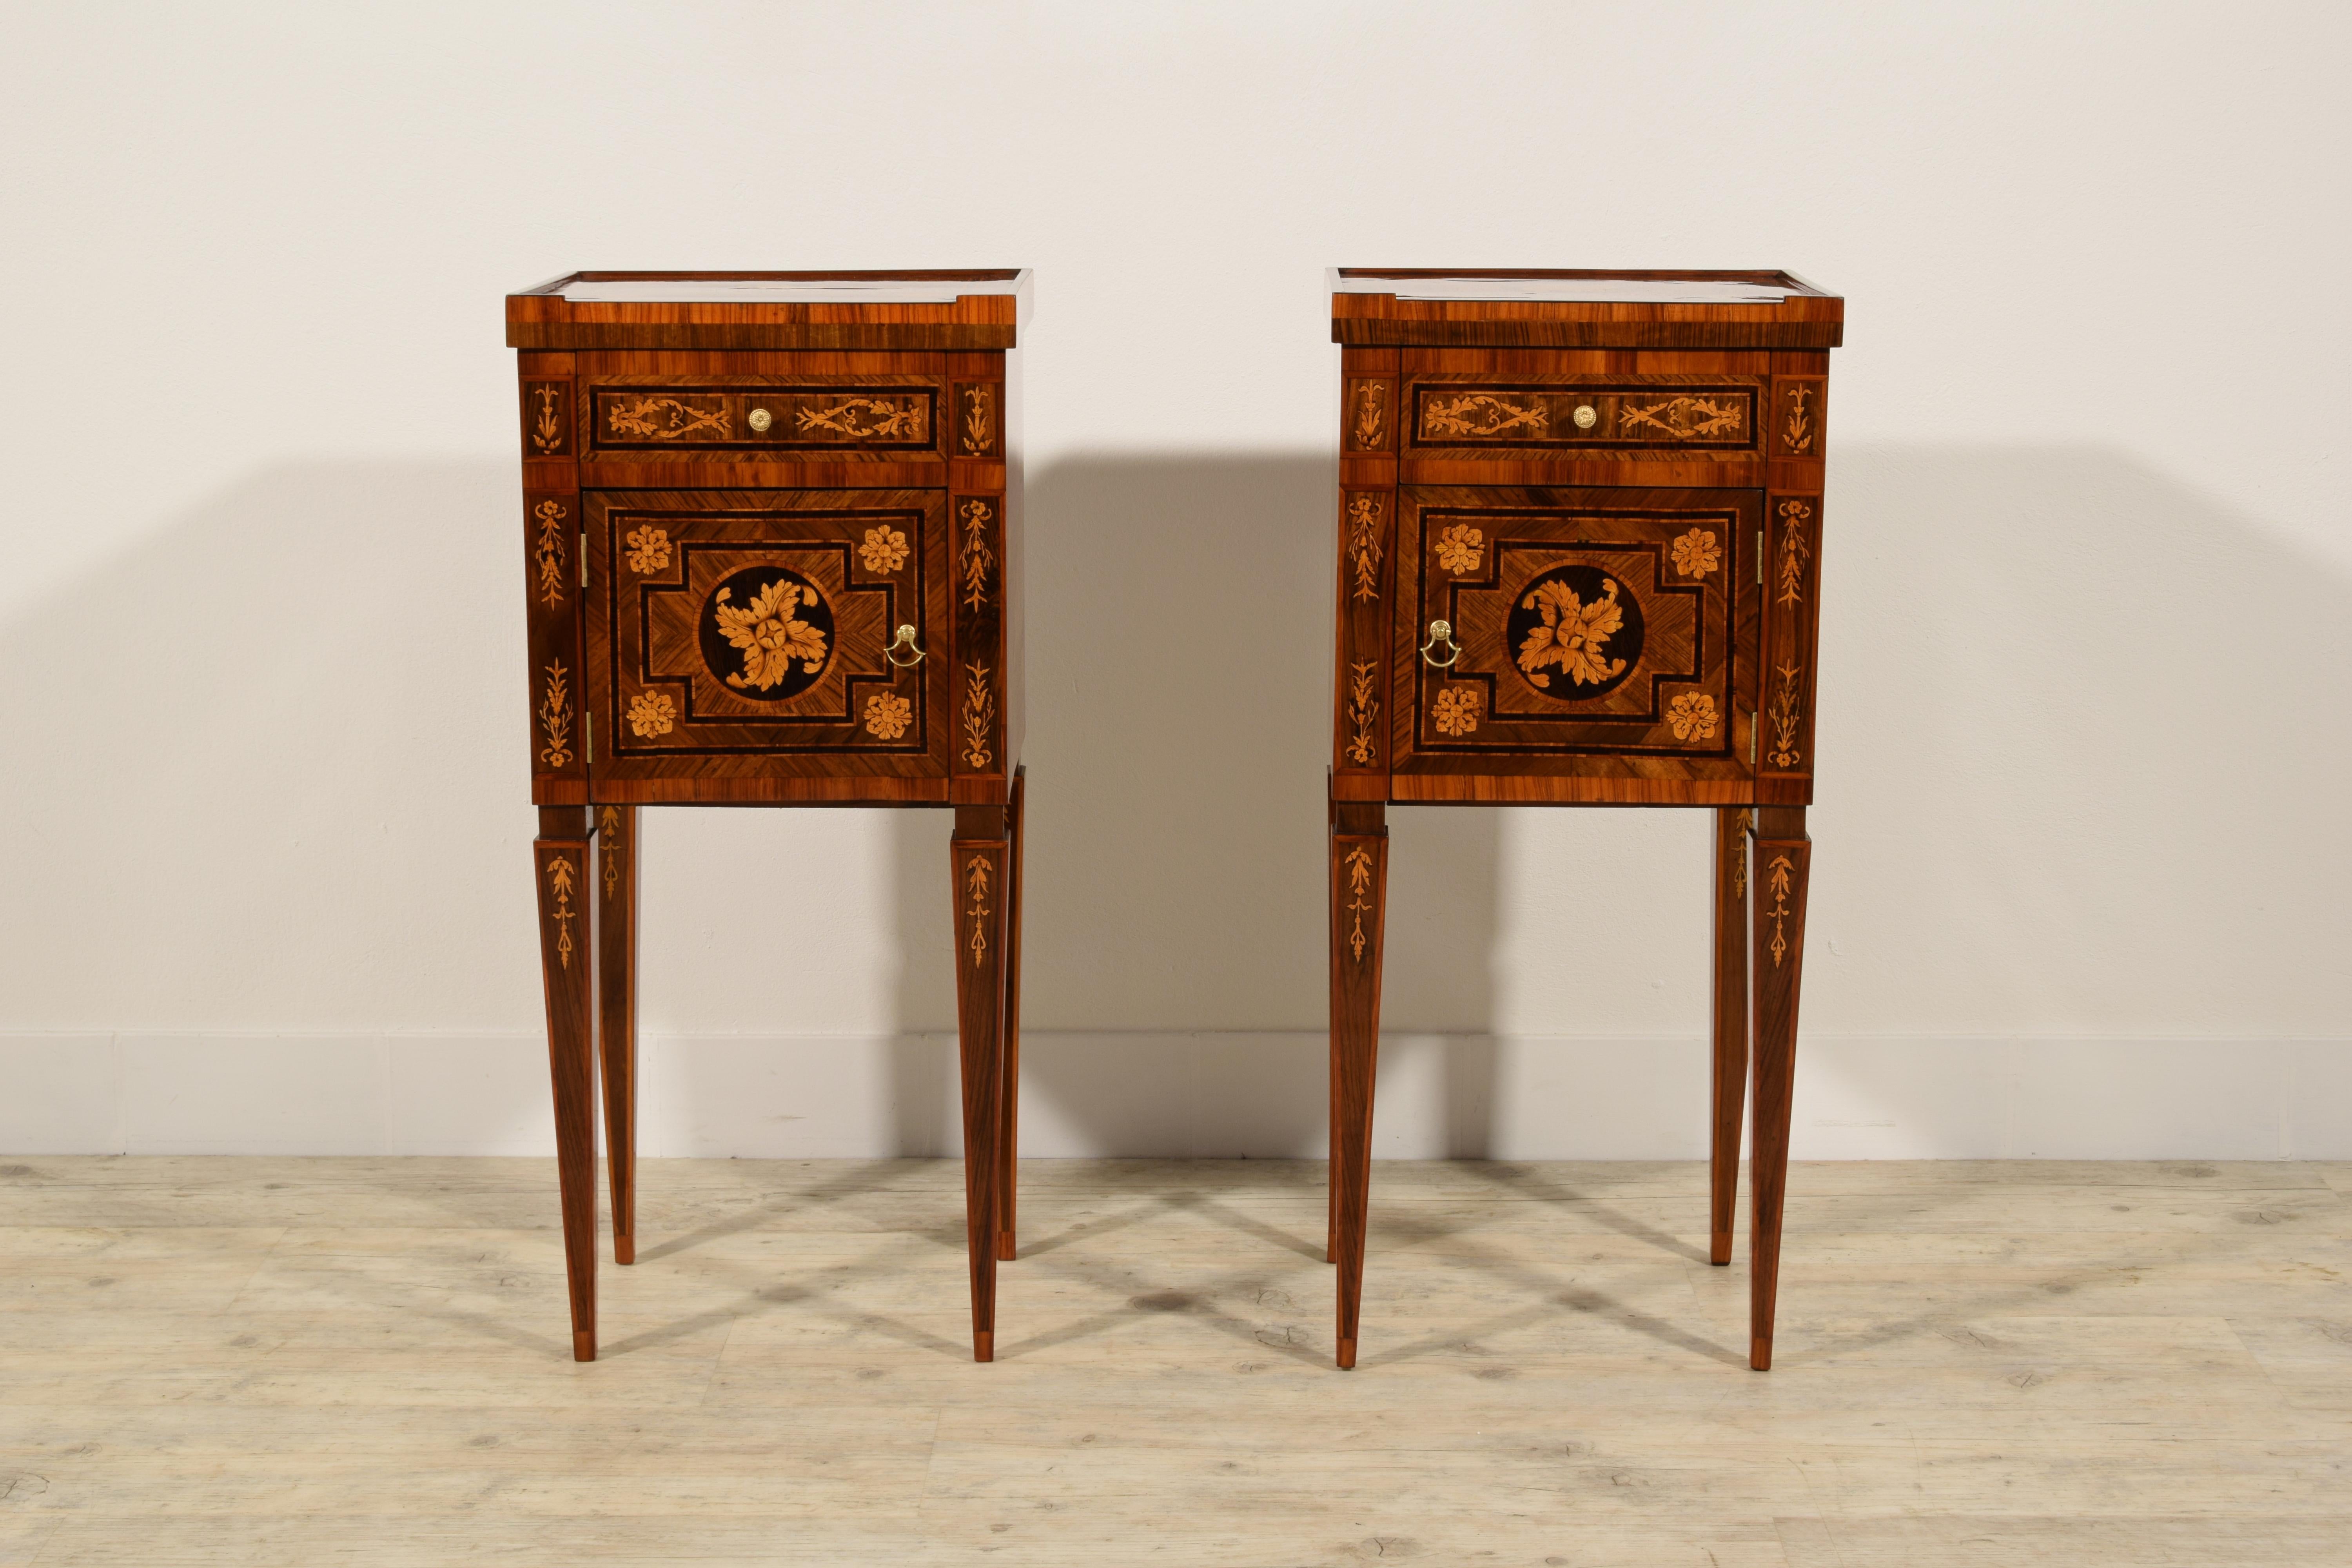 Inlay 18th Century, Pair of Italian Neoclassical Inlaid Wood Bedside Tables